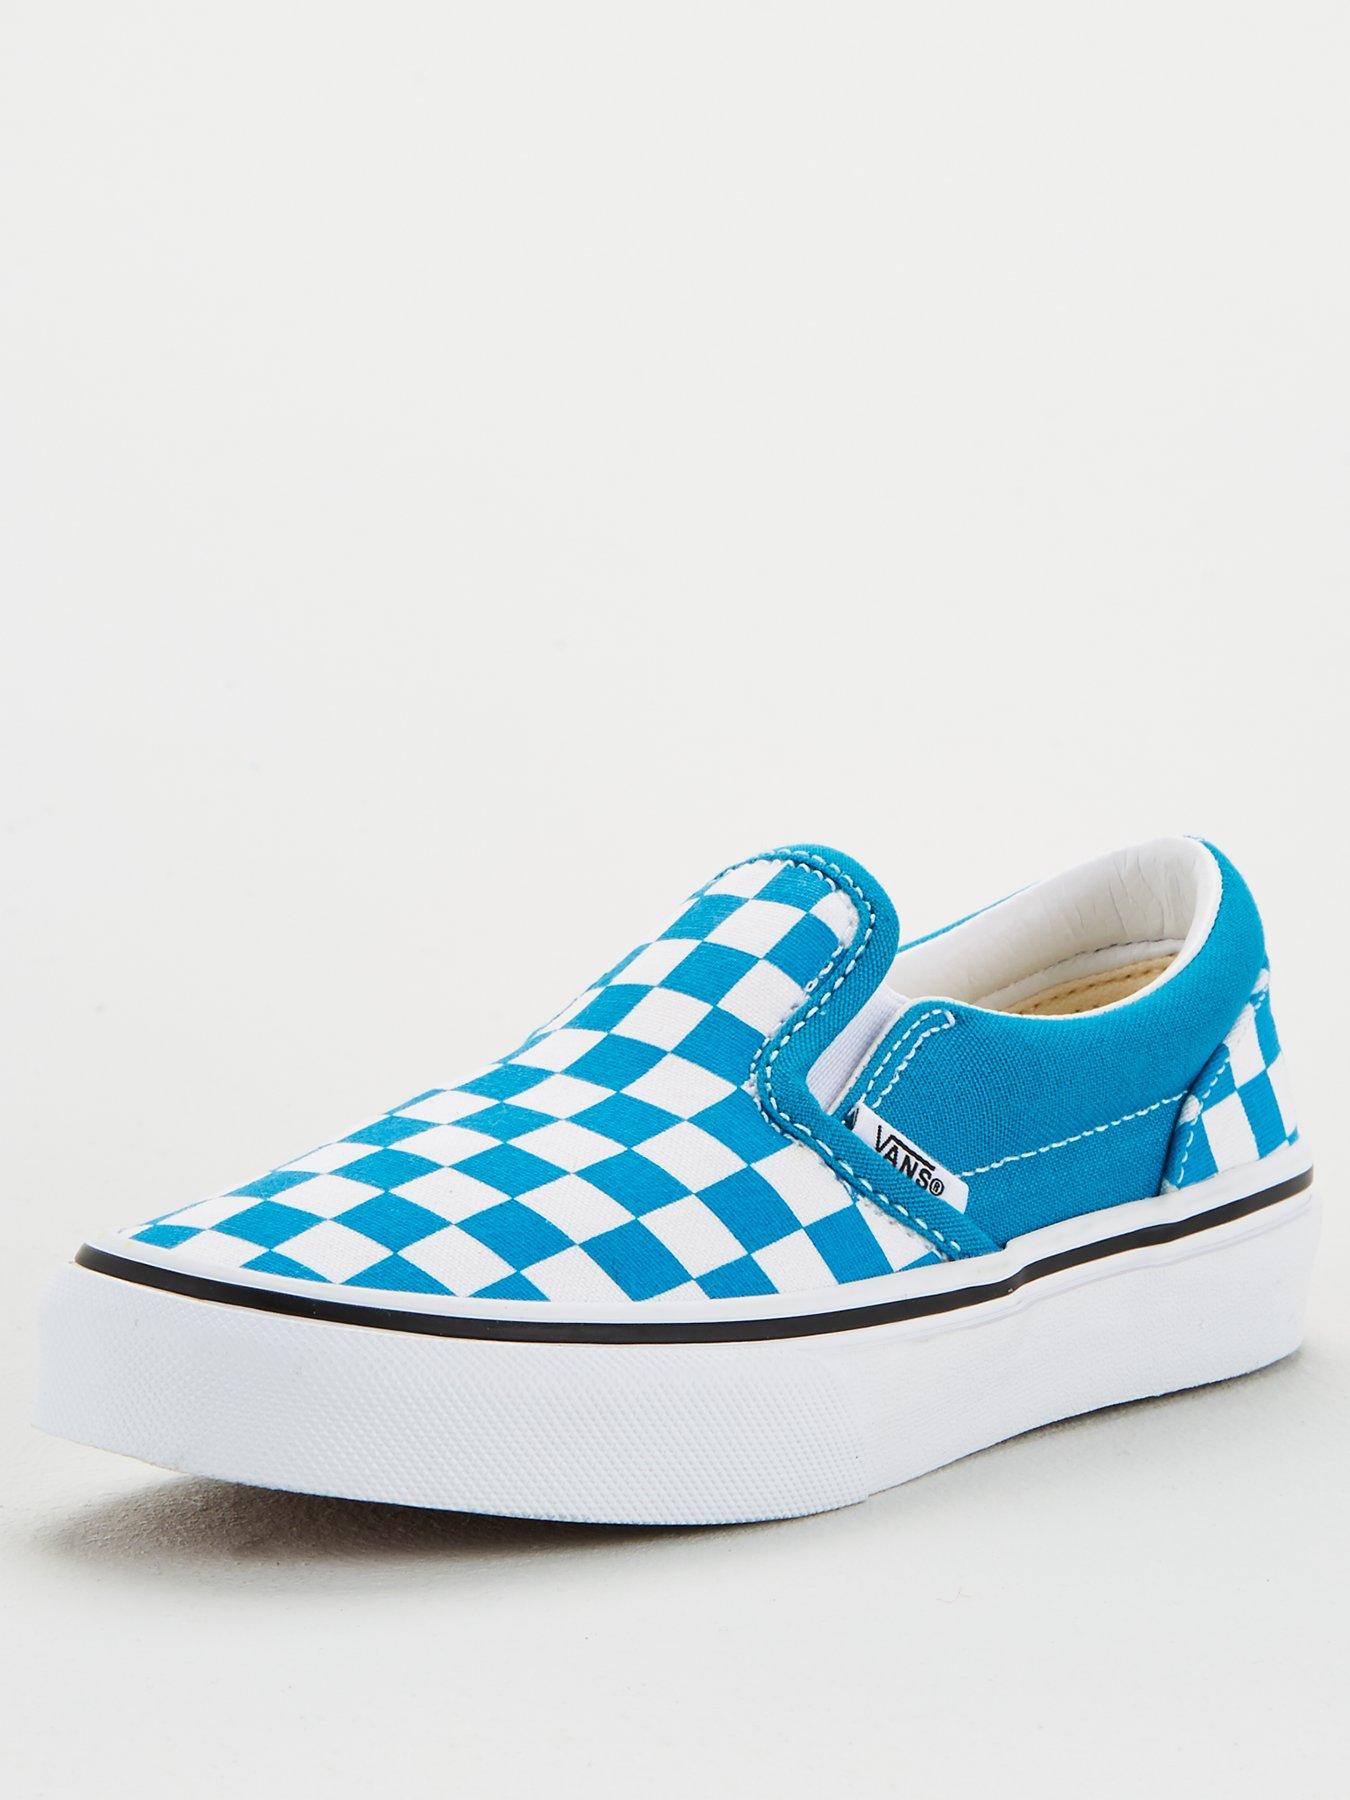 vans classic slip on trainers baby blue white checkerboard